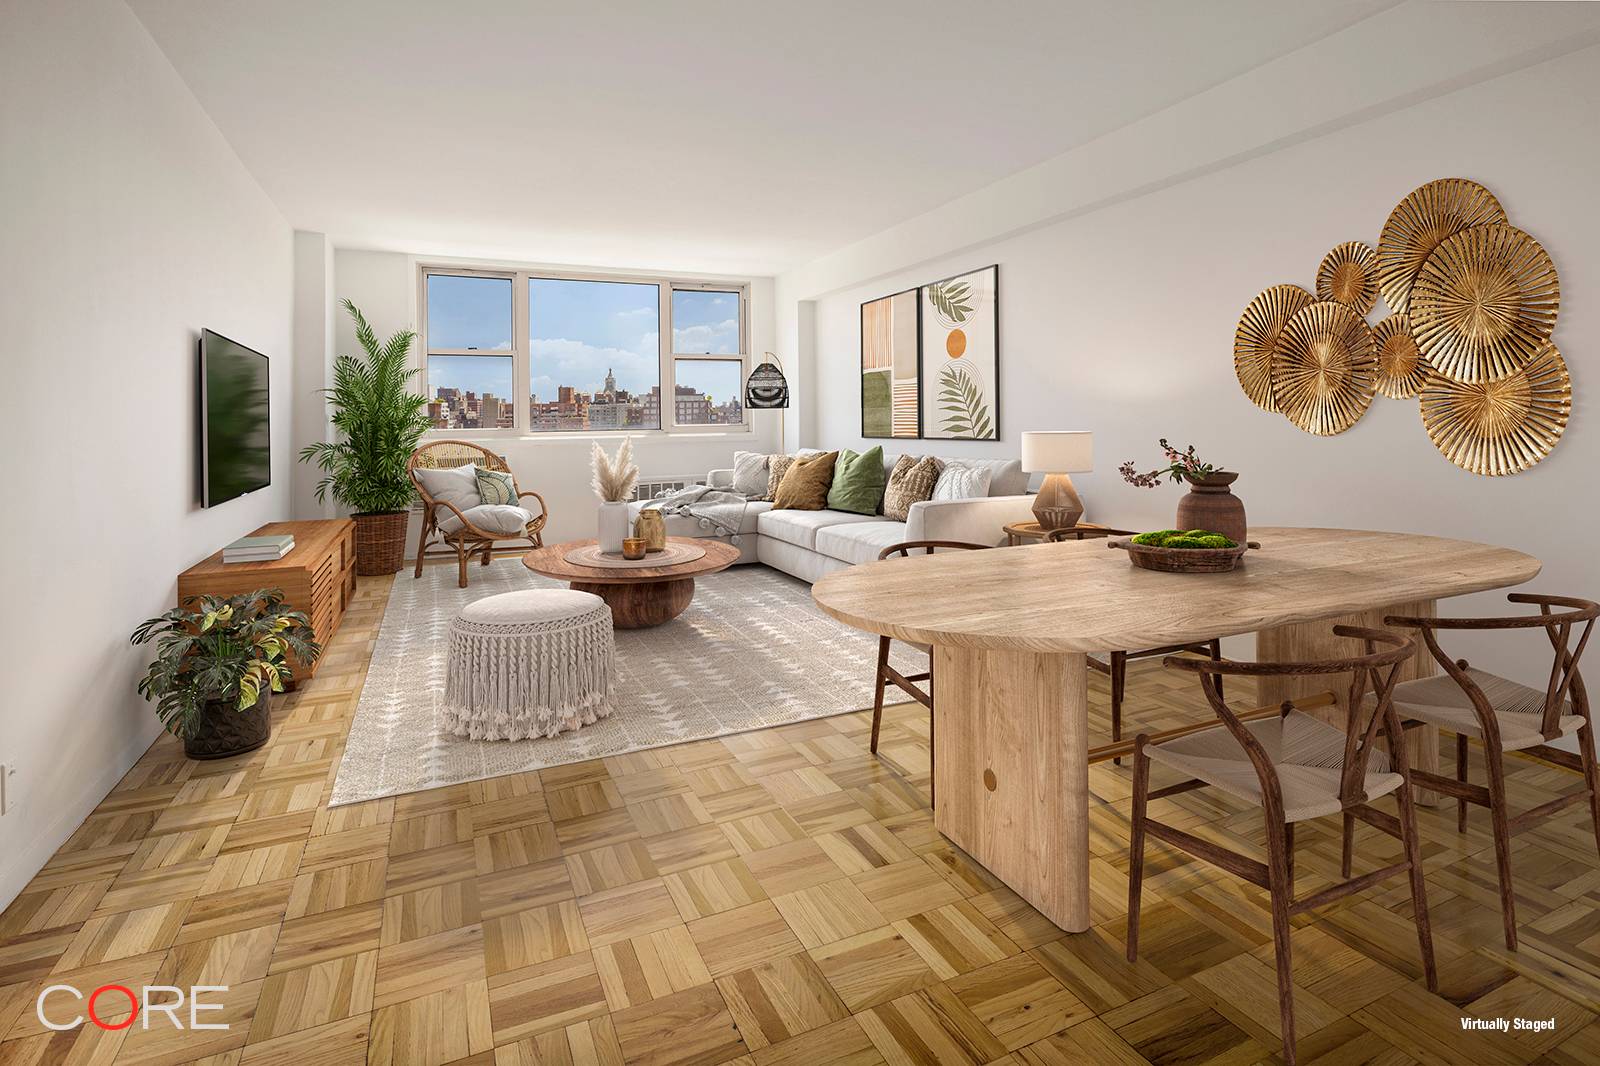 Enjoy stunning views of the West Village, the Empire State Building, and the northeast cityscape from the 18th floor of The Cezanne, a full service cooperative.